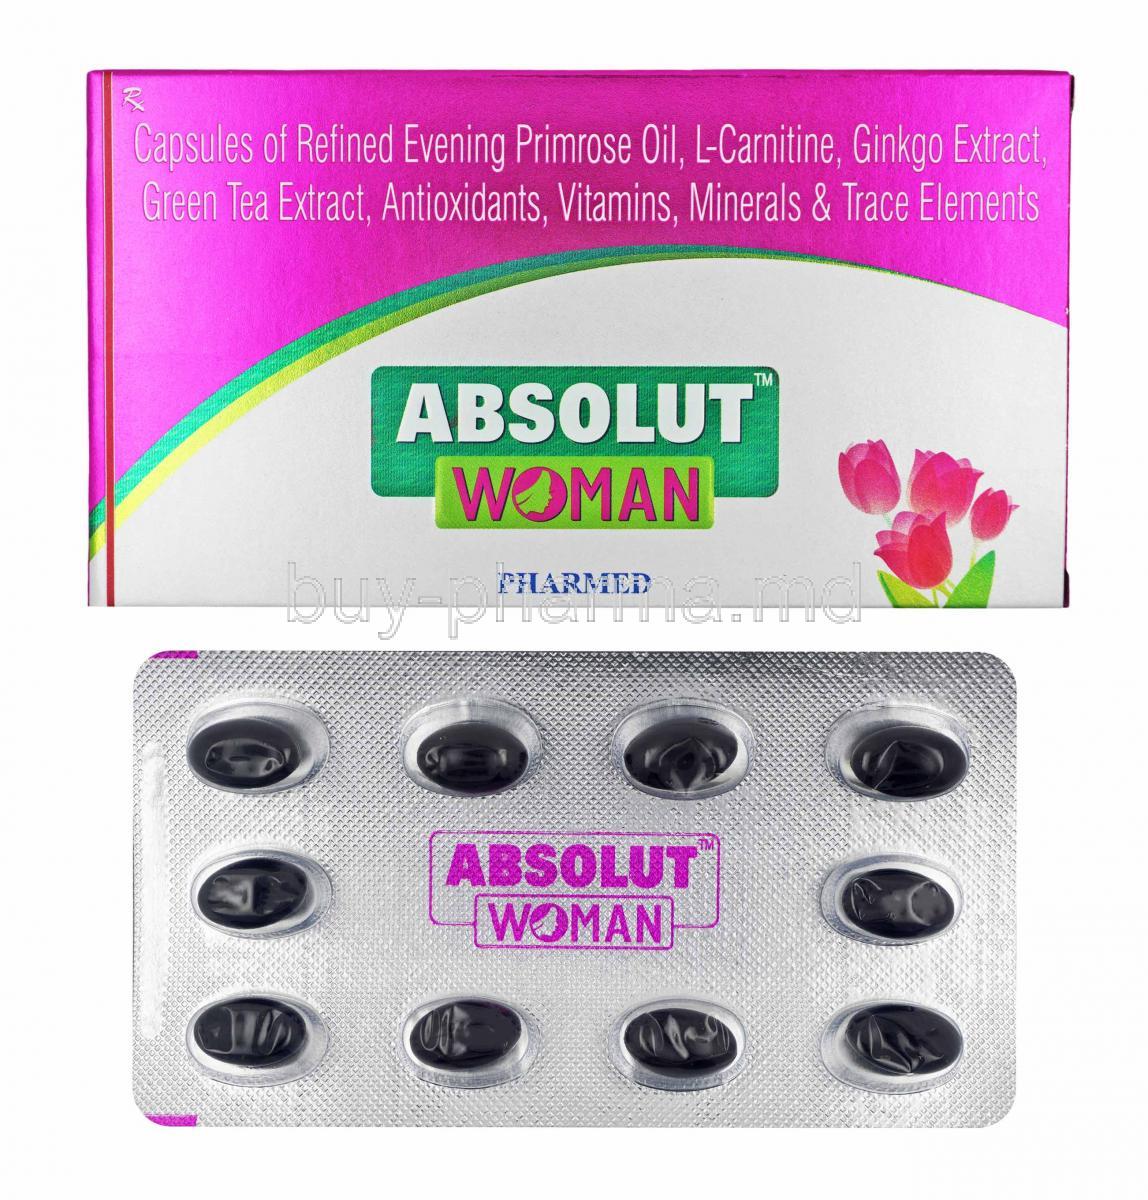 Absolut Woman box and capsules